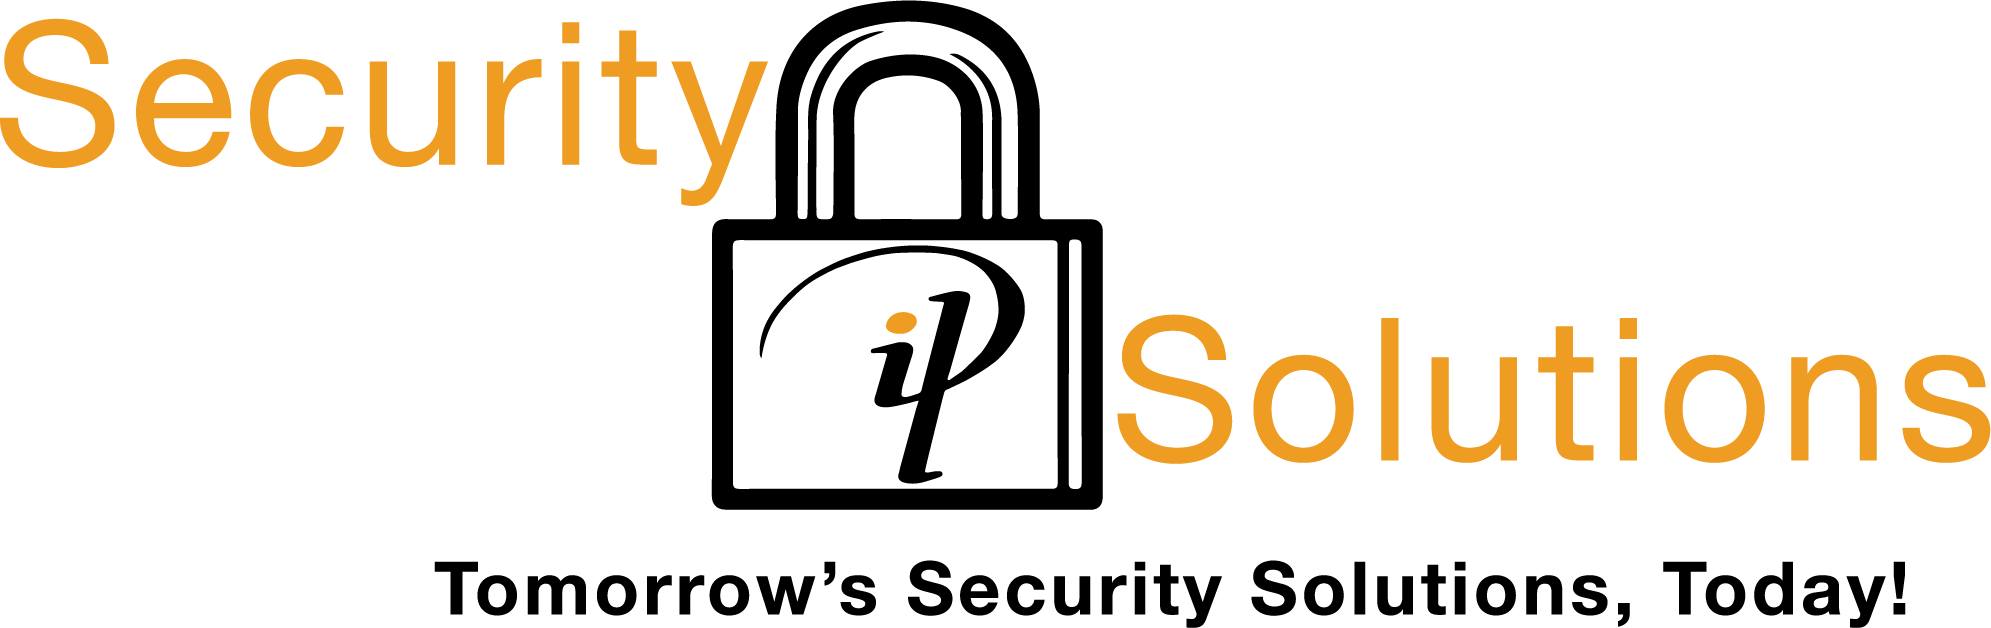 Security IP Solutions Logo